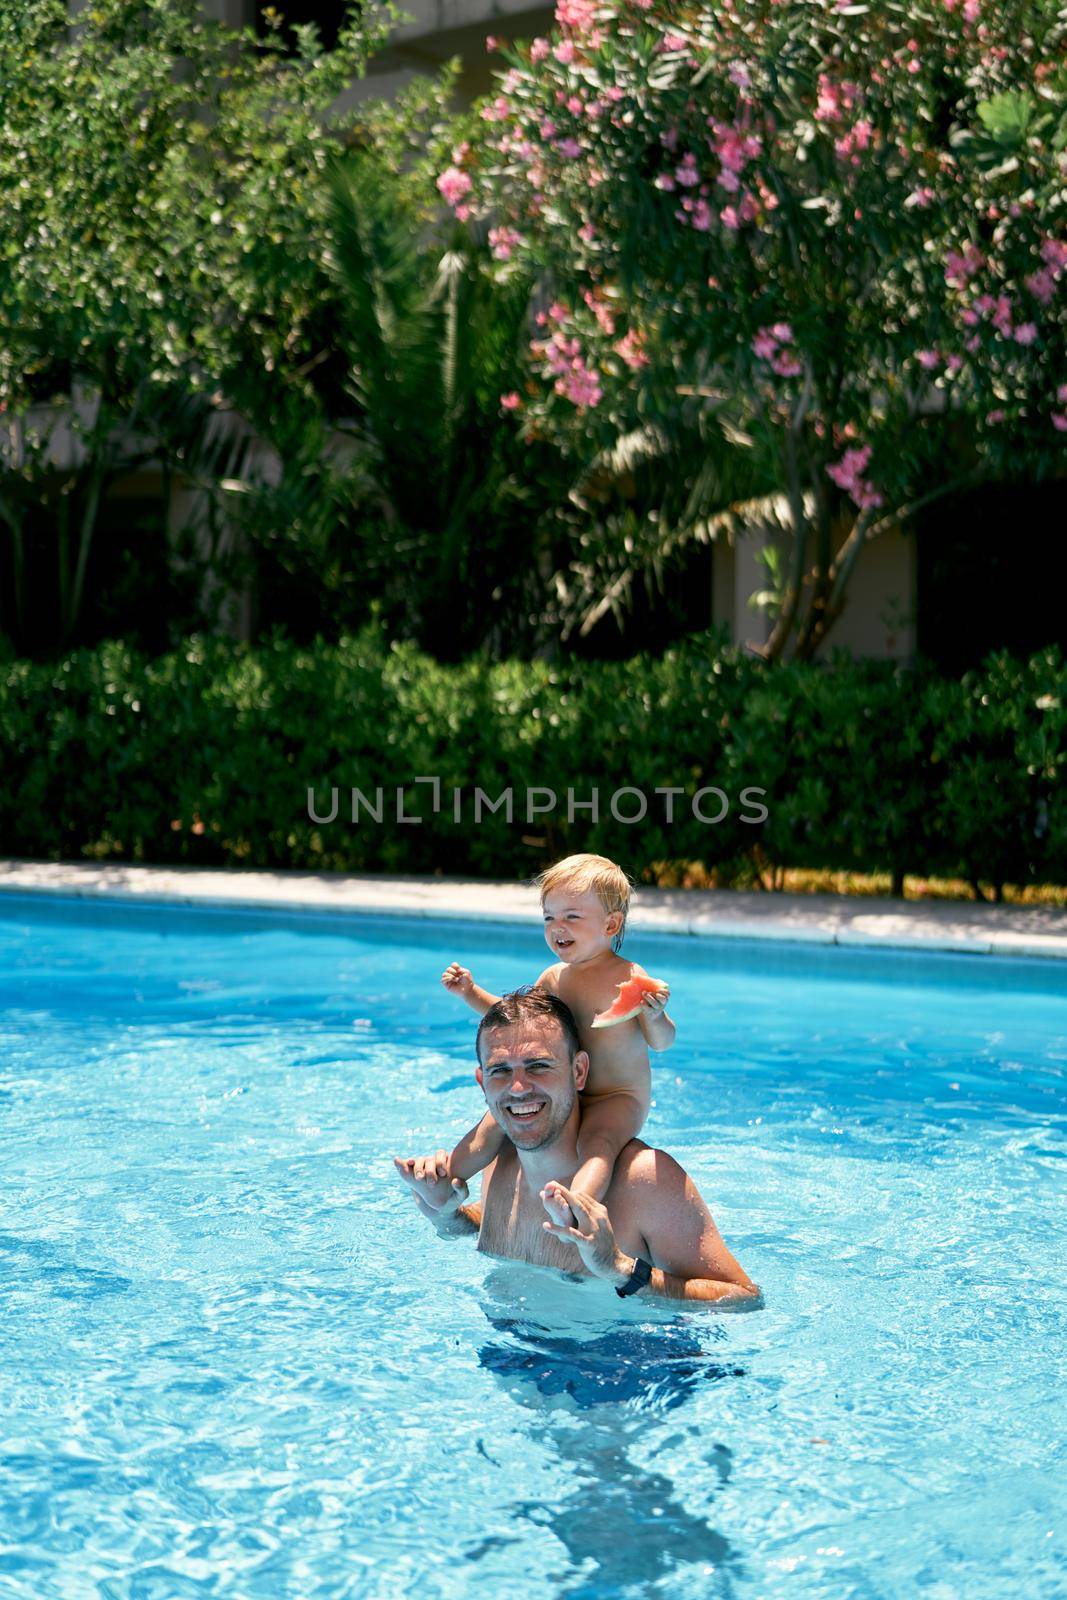 Smiling dad standing in the pool with a small child on his shoulders by Nadtochiy